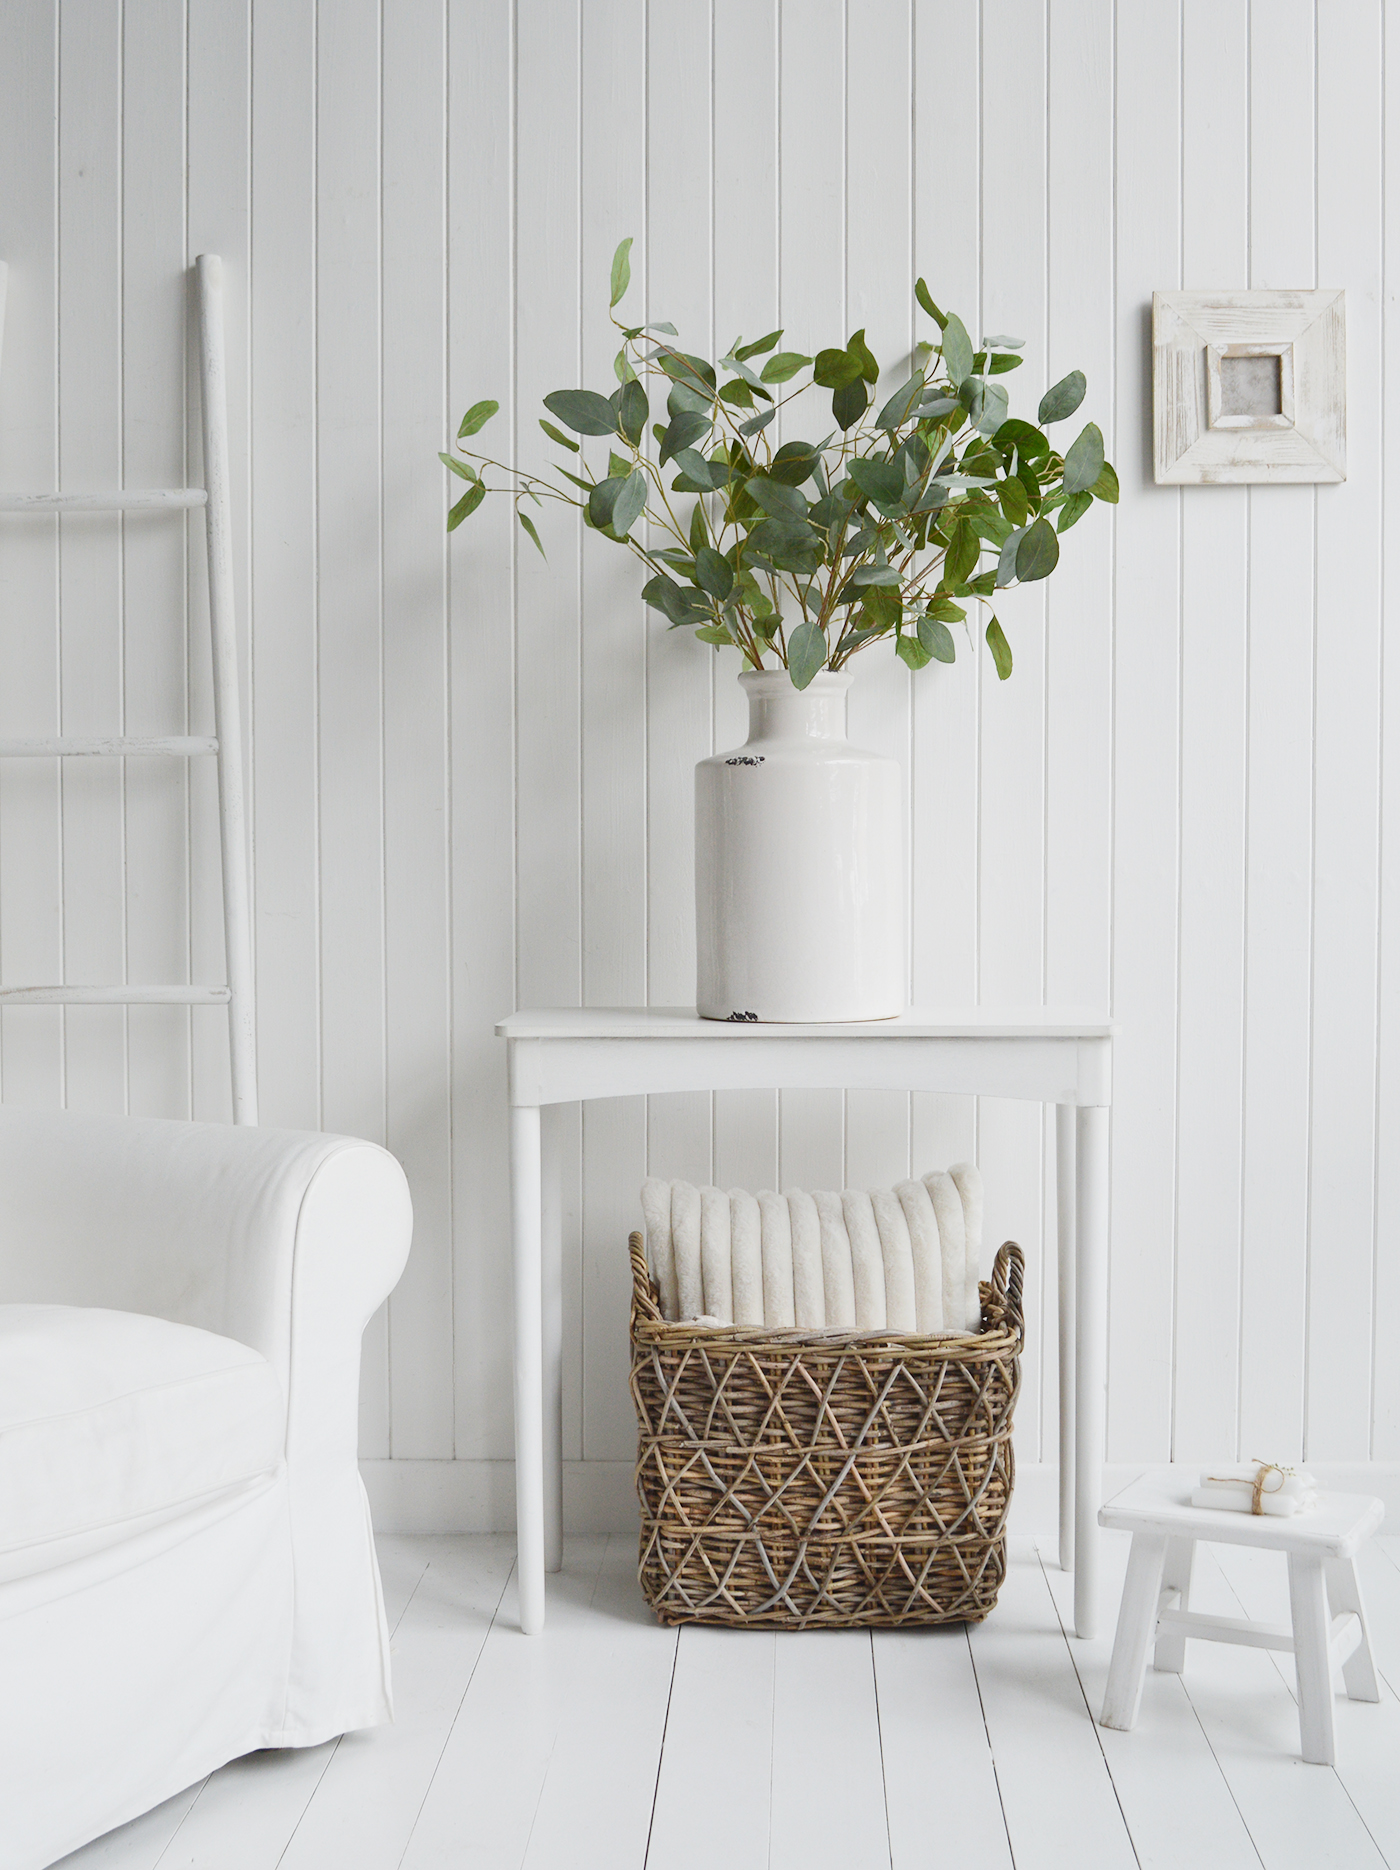 Simply white... an all white interior with a contrasting Cascao Bay grey willow baskewt and Silver Dollar Eucalyptus to add texture and interest